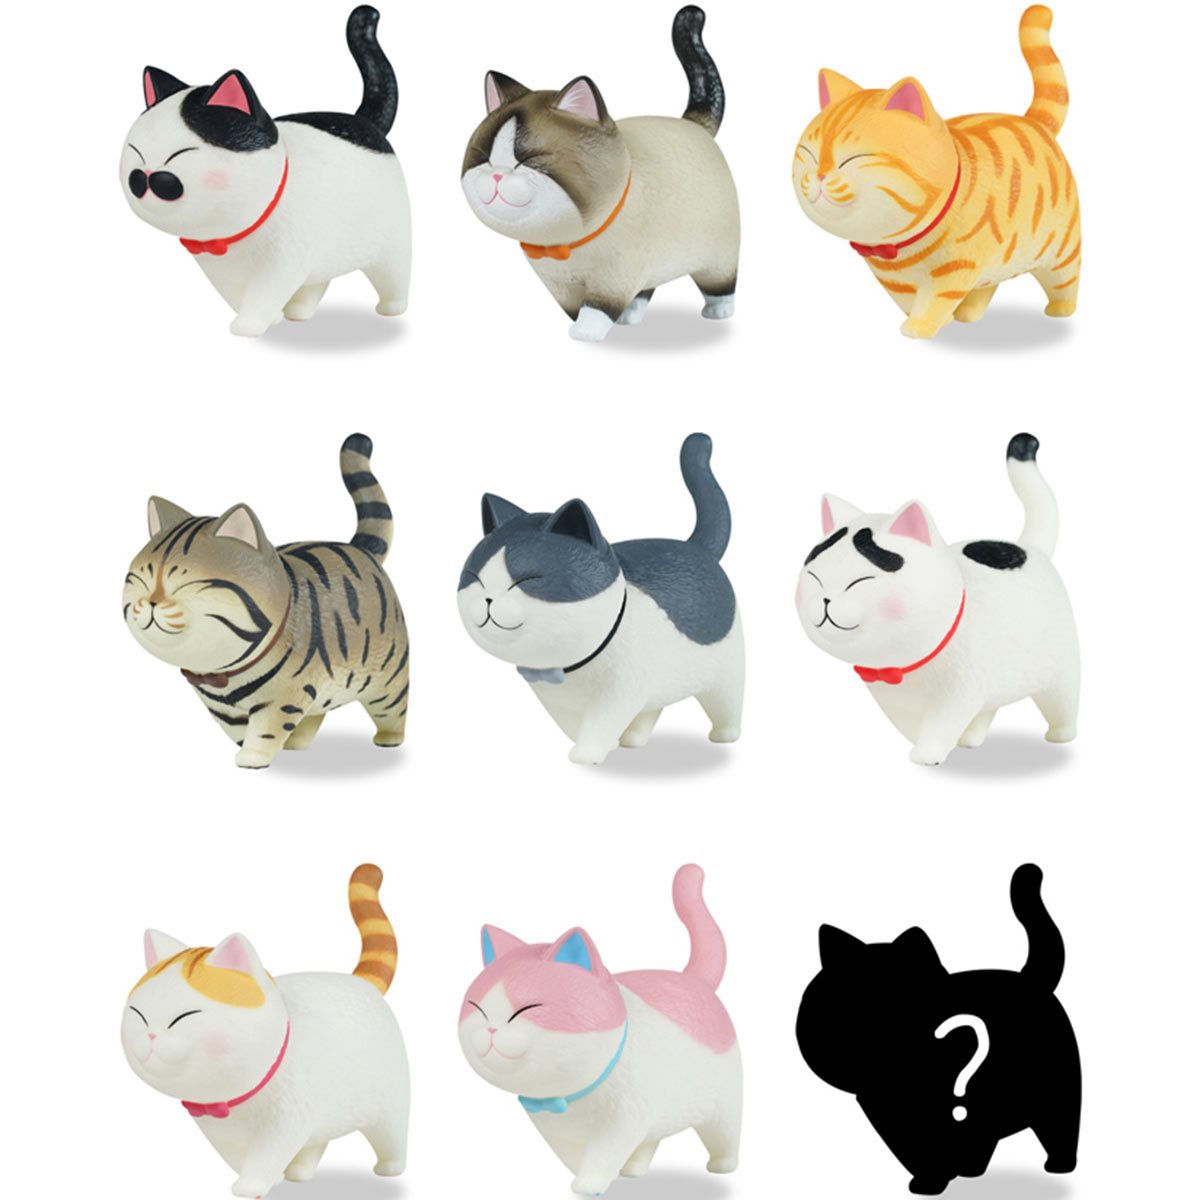 [AIRTOYS] MIAO LING DANG - Bell Cat Collections 2 Series Blind Box